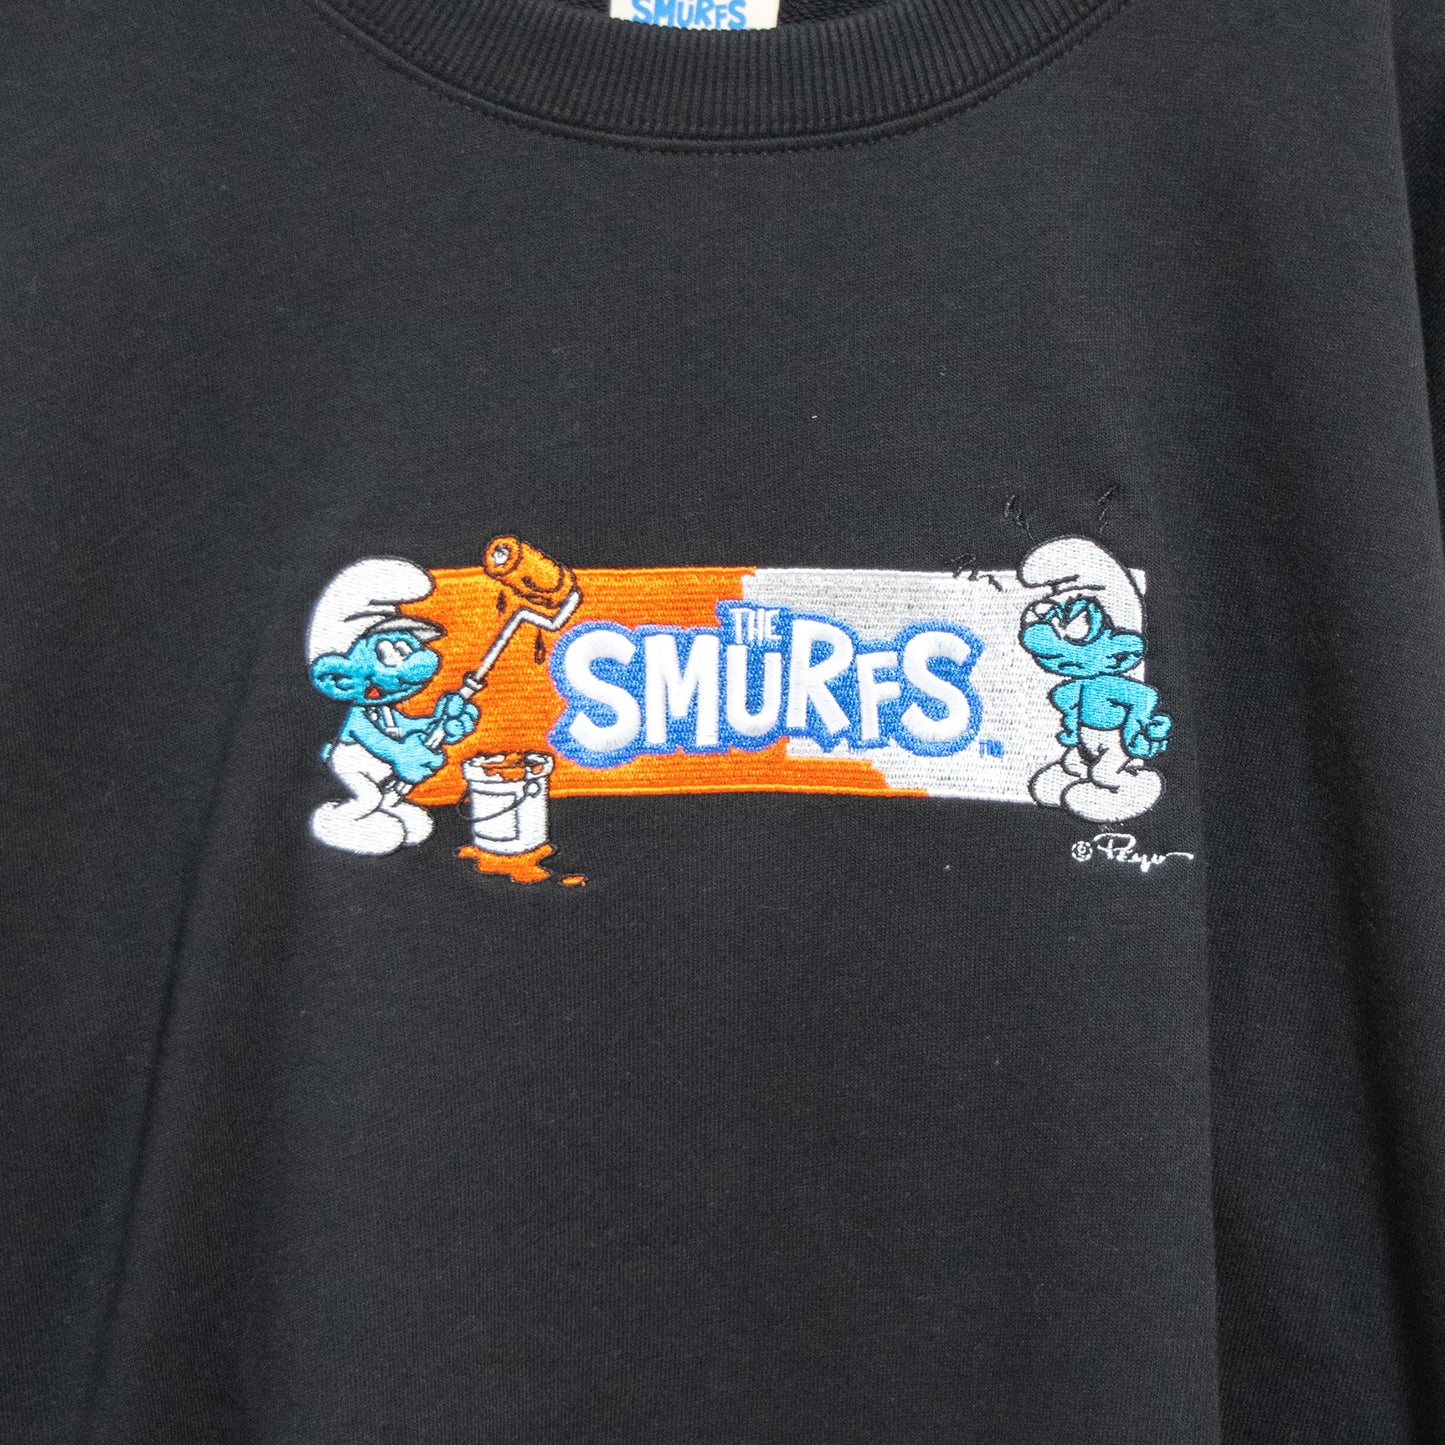 THE SMURFS Embroidery Crew Neck Sweatshirt - YOUAREMYPOISON